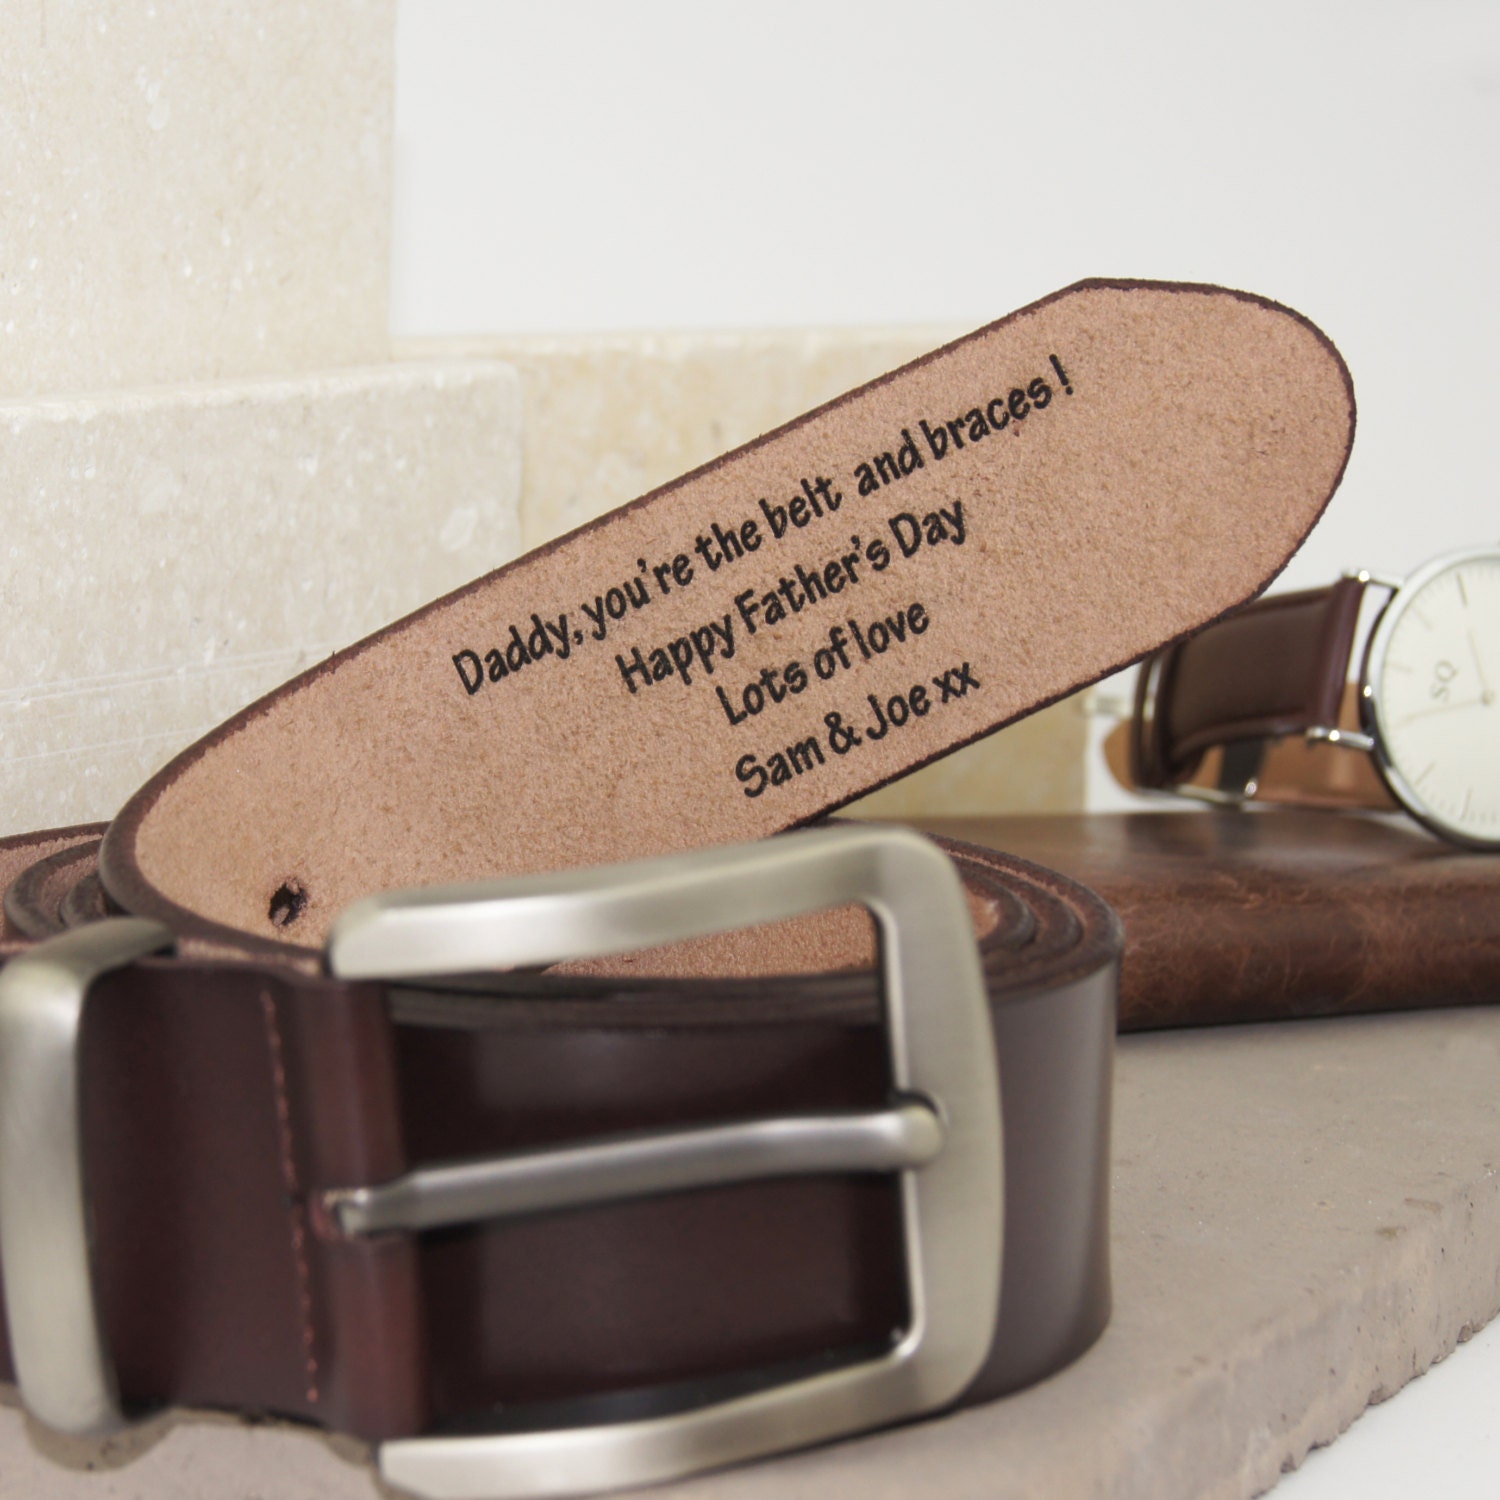 Personalised Men's Leather Belt-personalised leather belt for men-men's leather belt engraved with personal message-gift for dad-men's gift